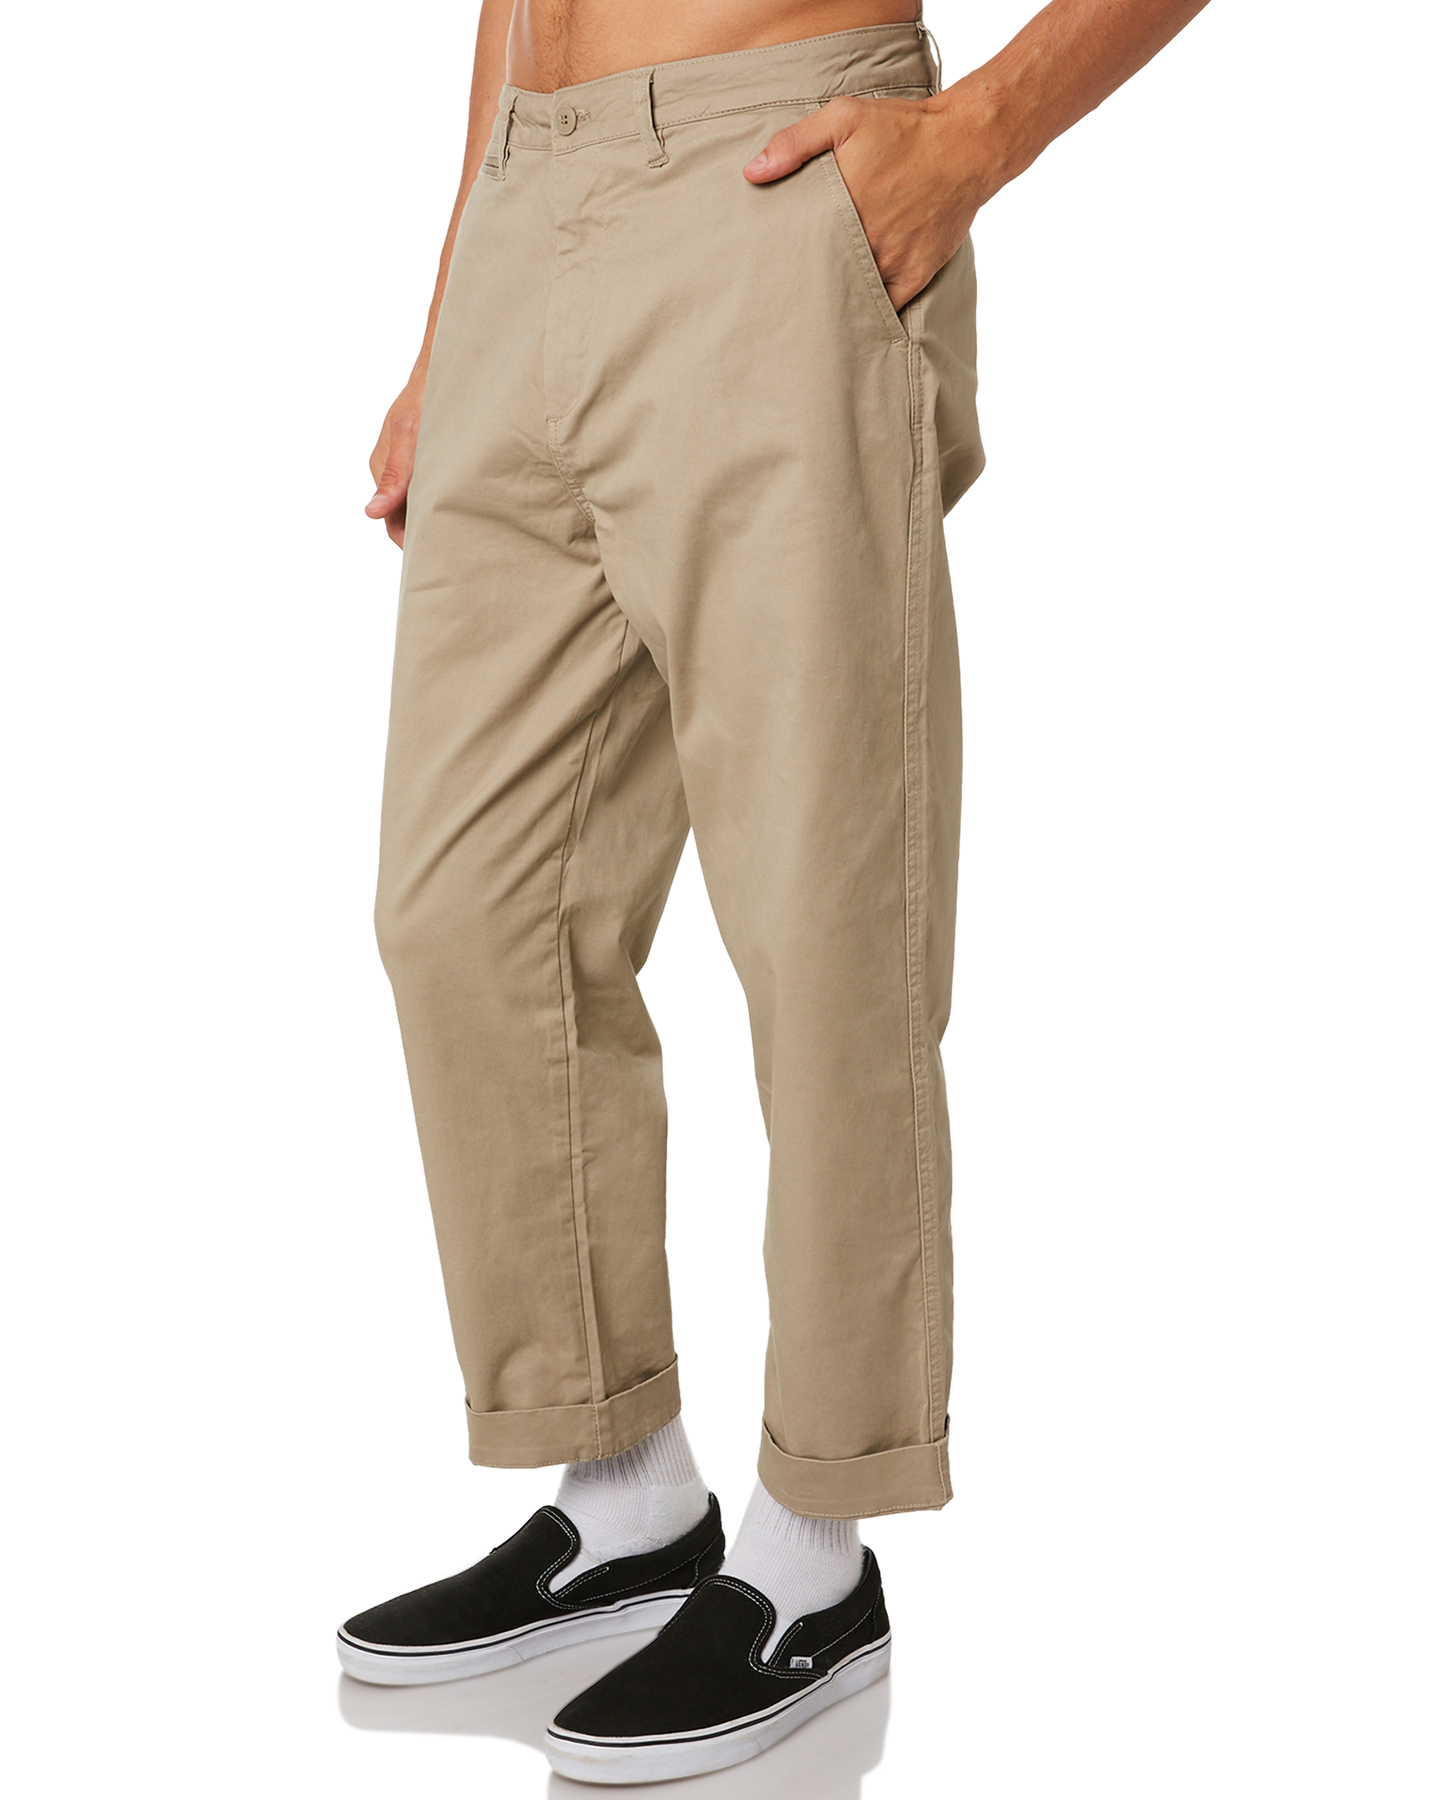 Swell Vinny Mens Loose Fit Chino Pant - Khaki | SurfStitch